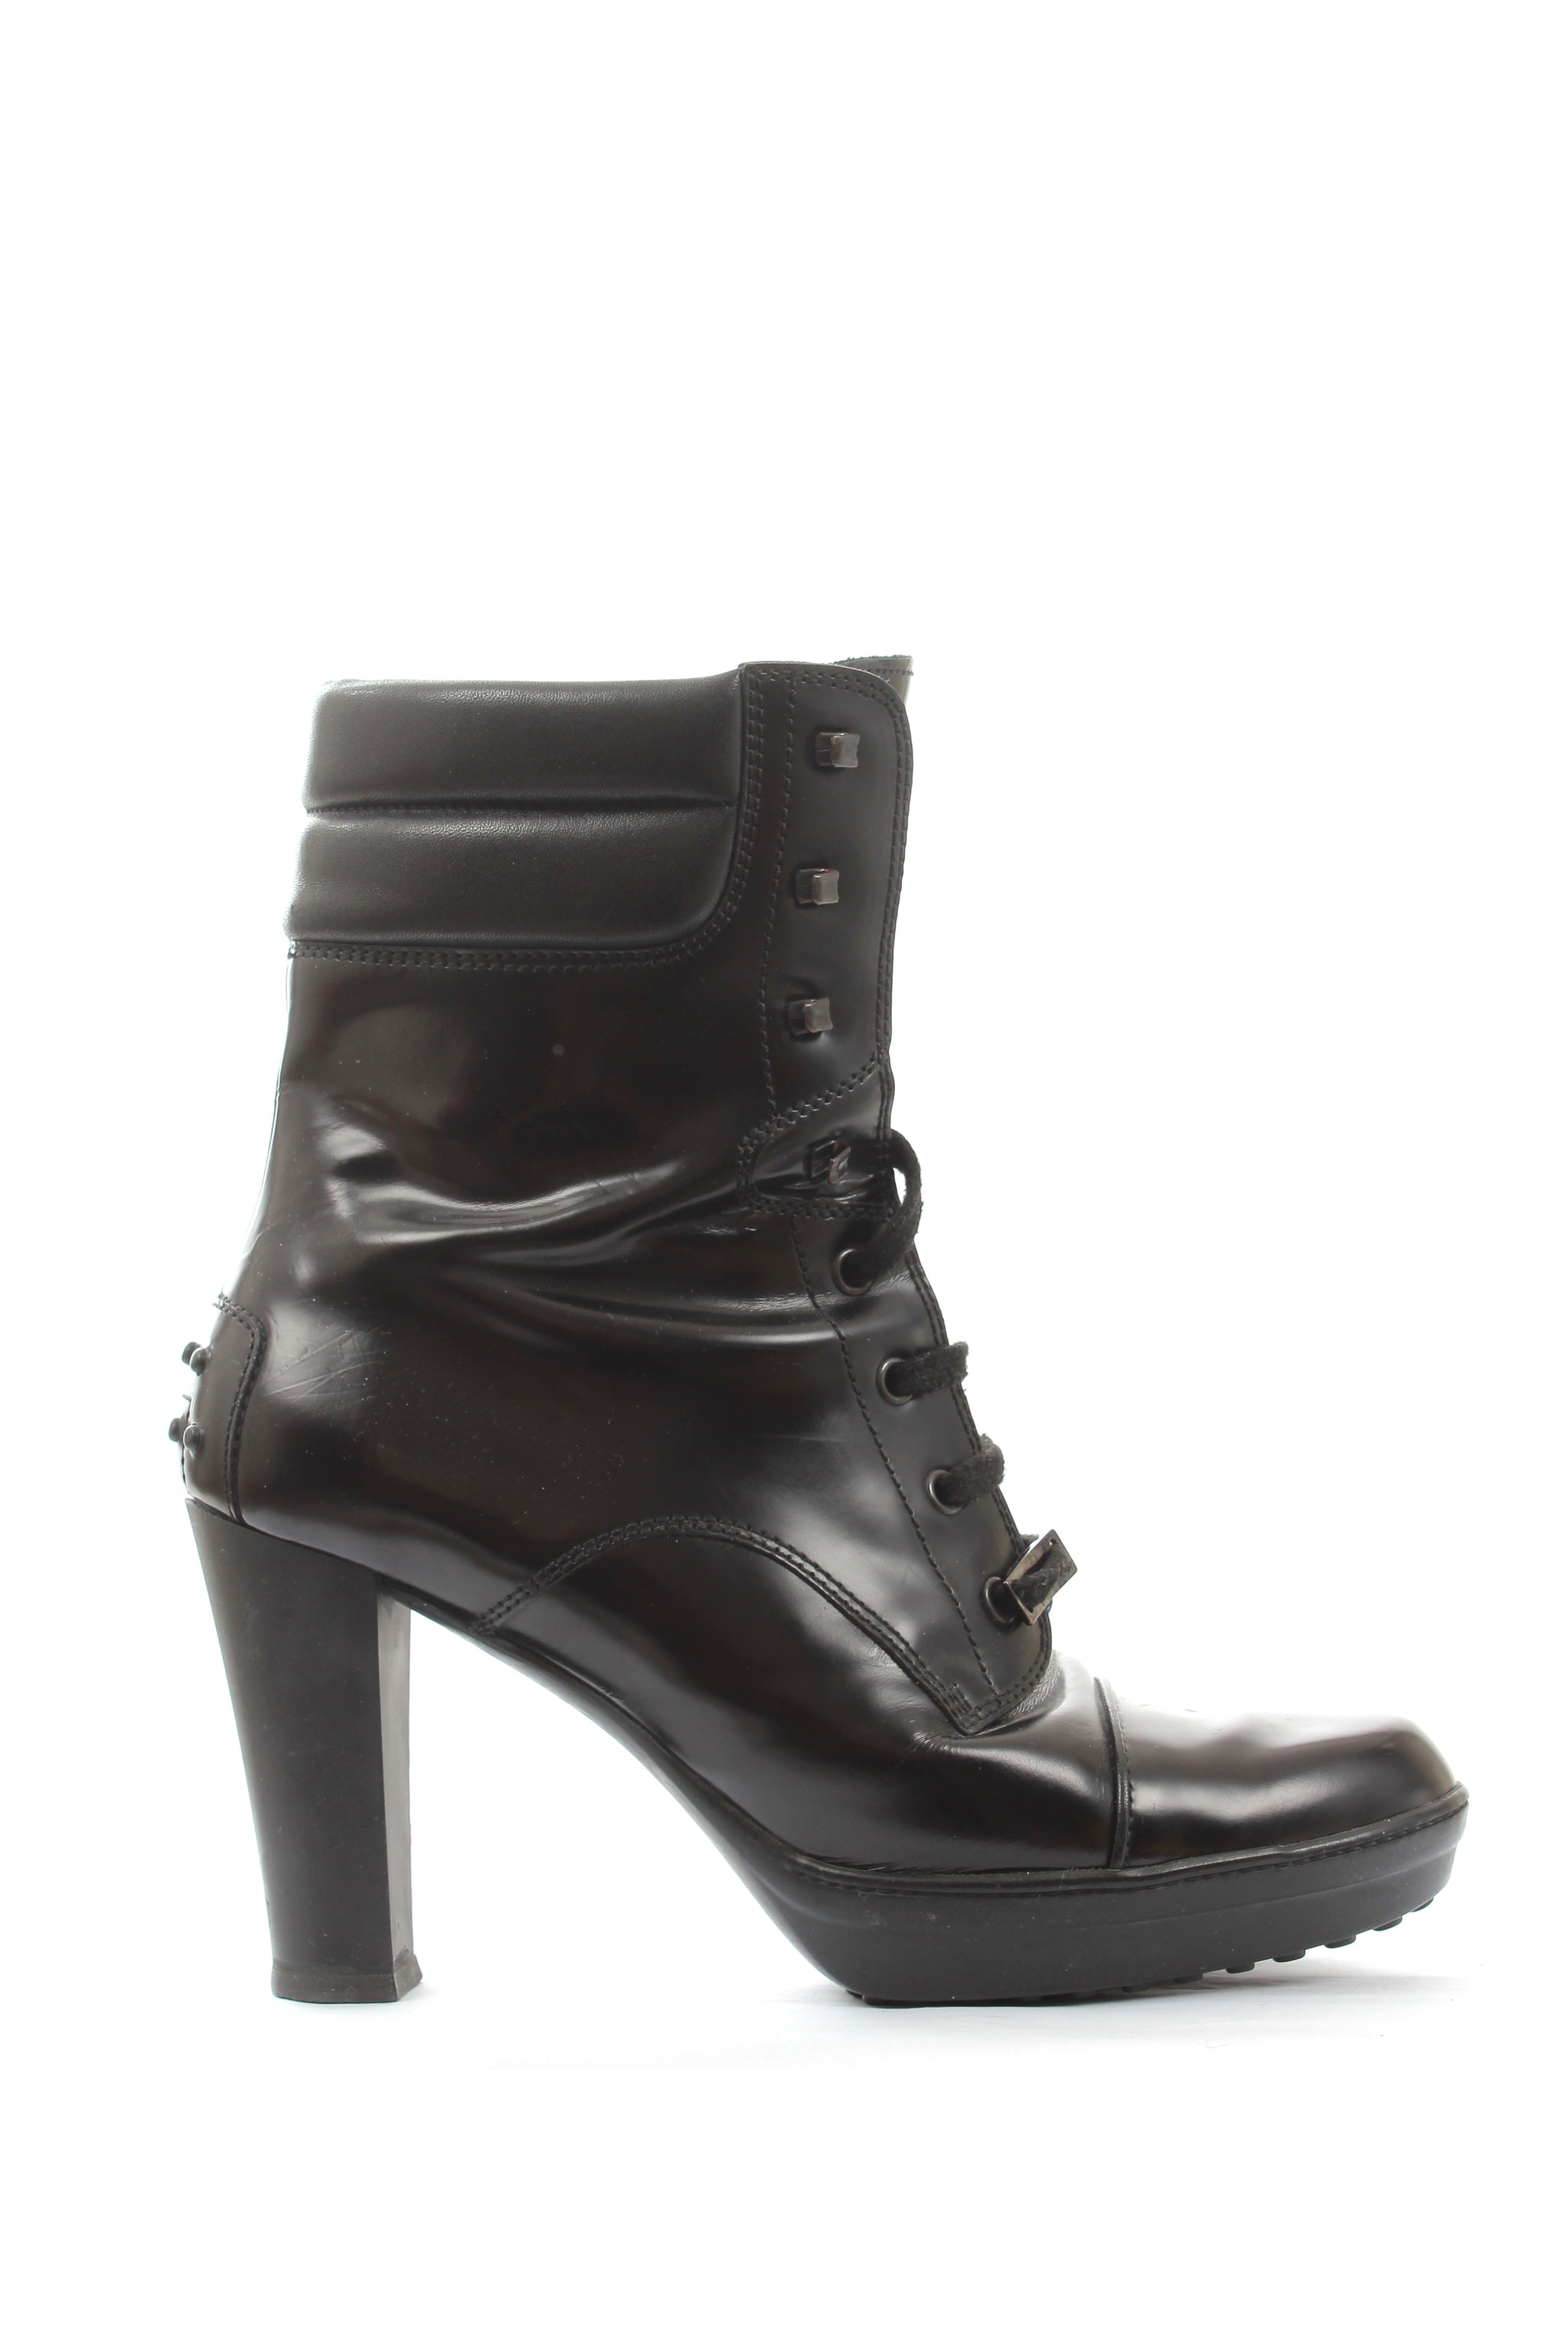 Chanel Quilted Leather Lace-Up Platform Ankle Boots - Closet Upgrade